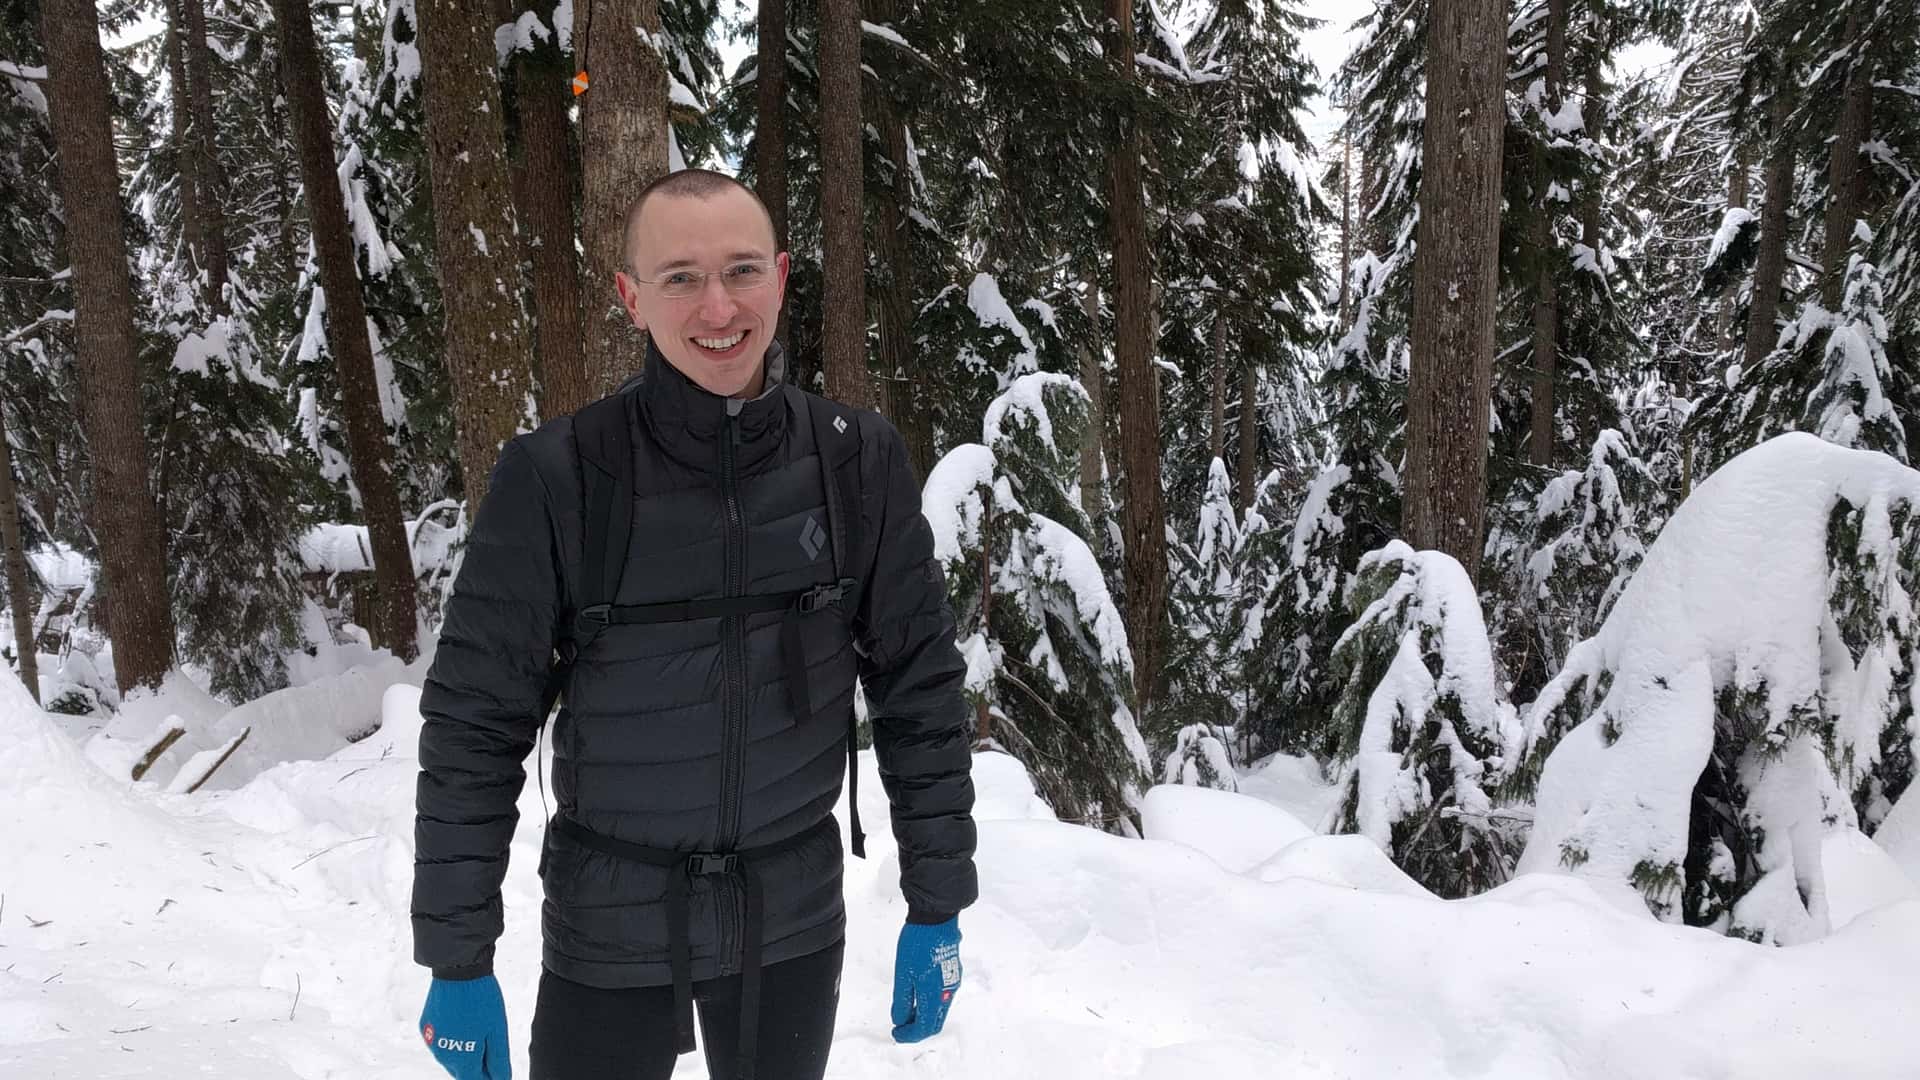 Andrew hiking in the snow on Mount Fromme